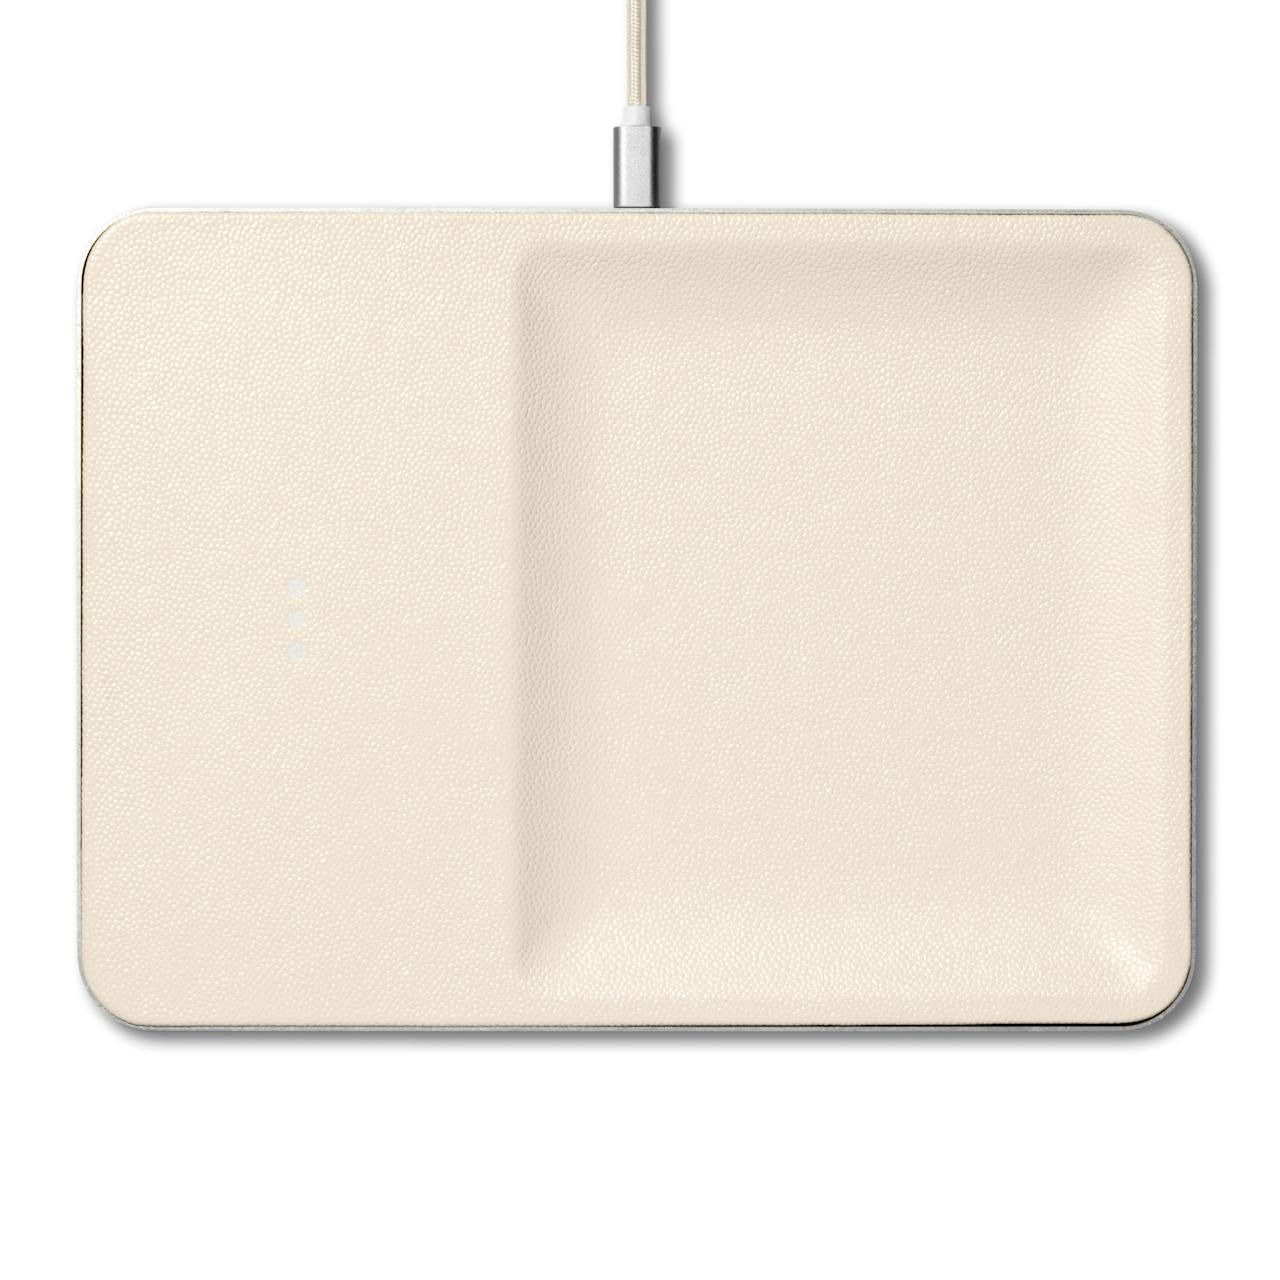 Courant Catch:3 - Accessory Tray + Charging Block